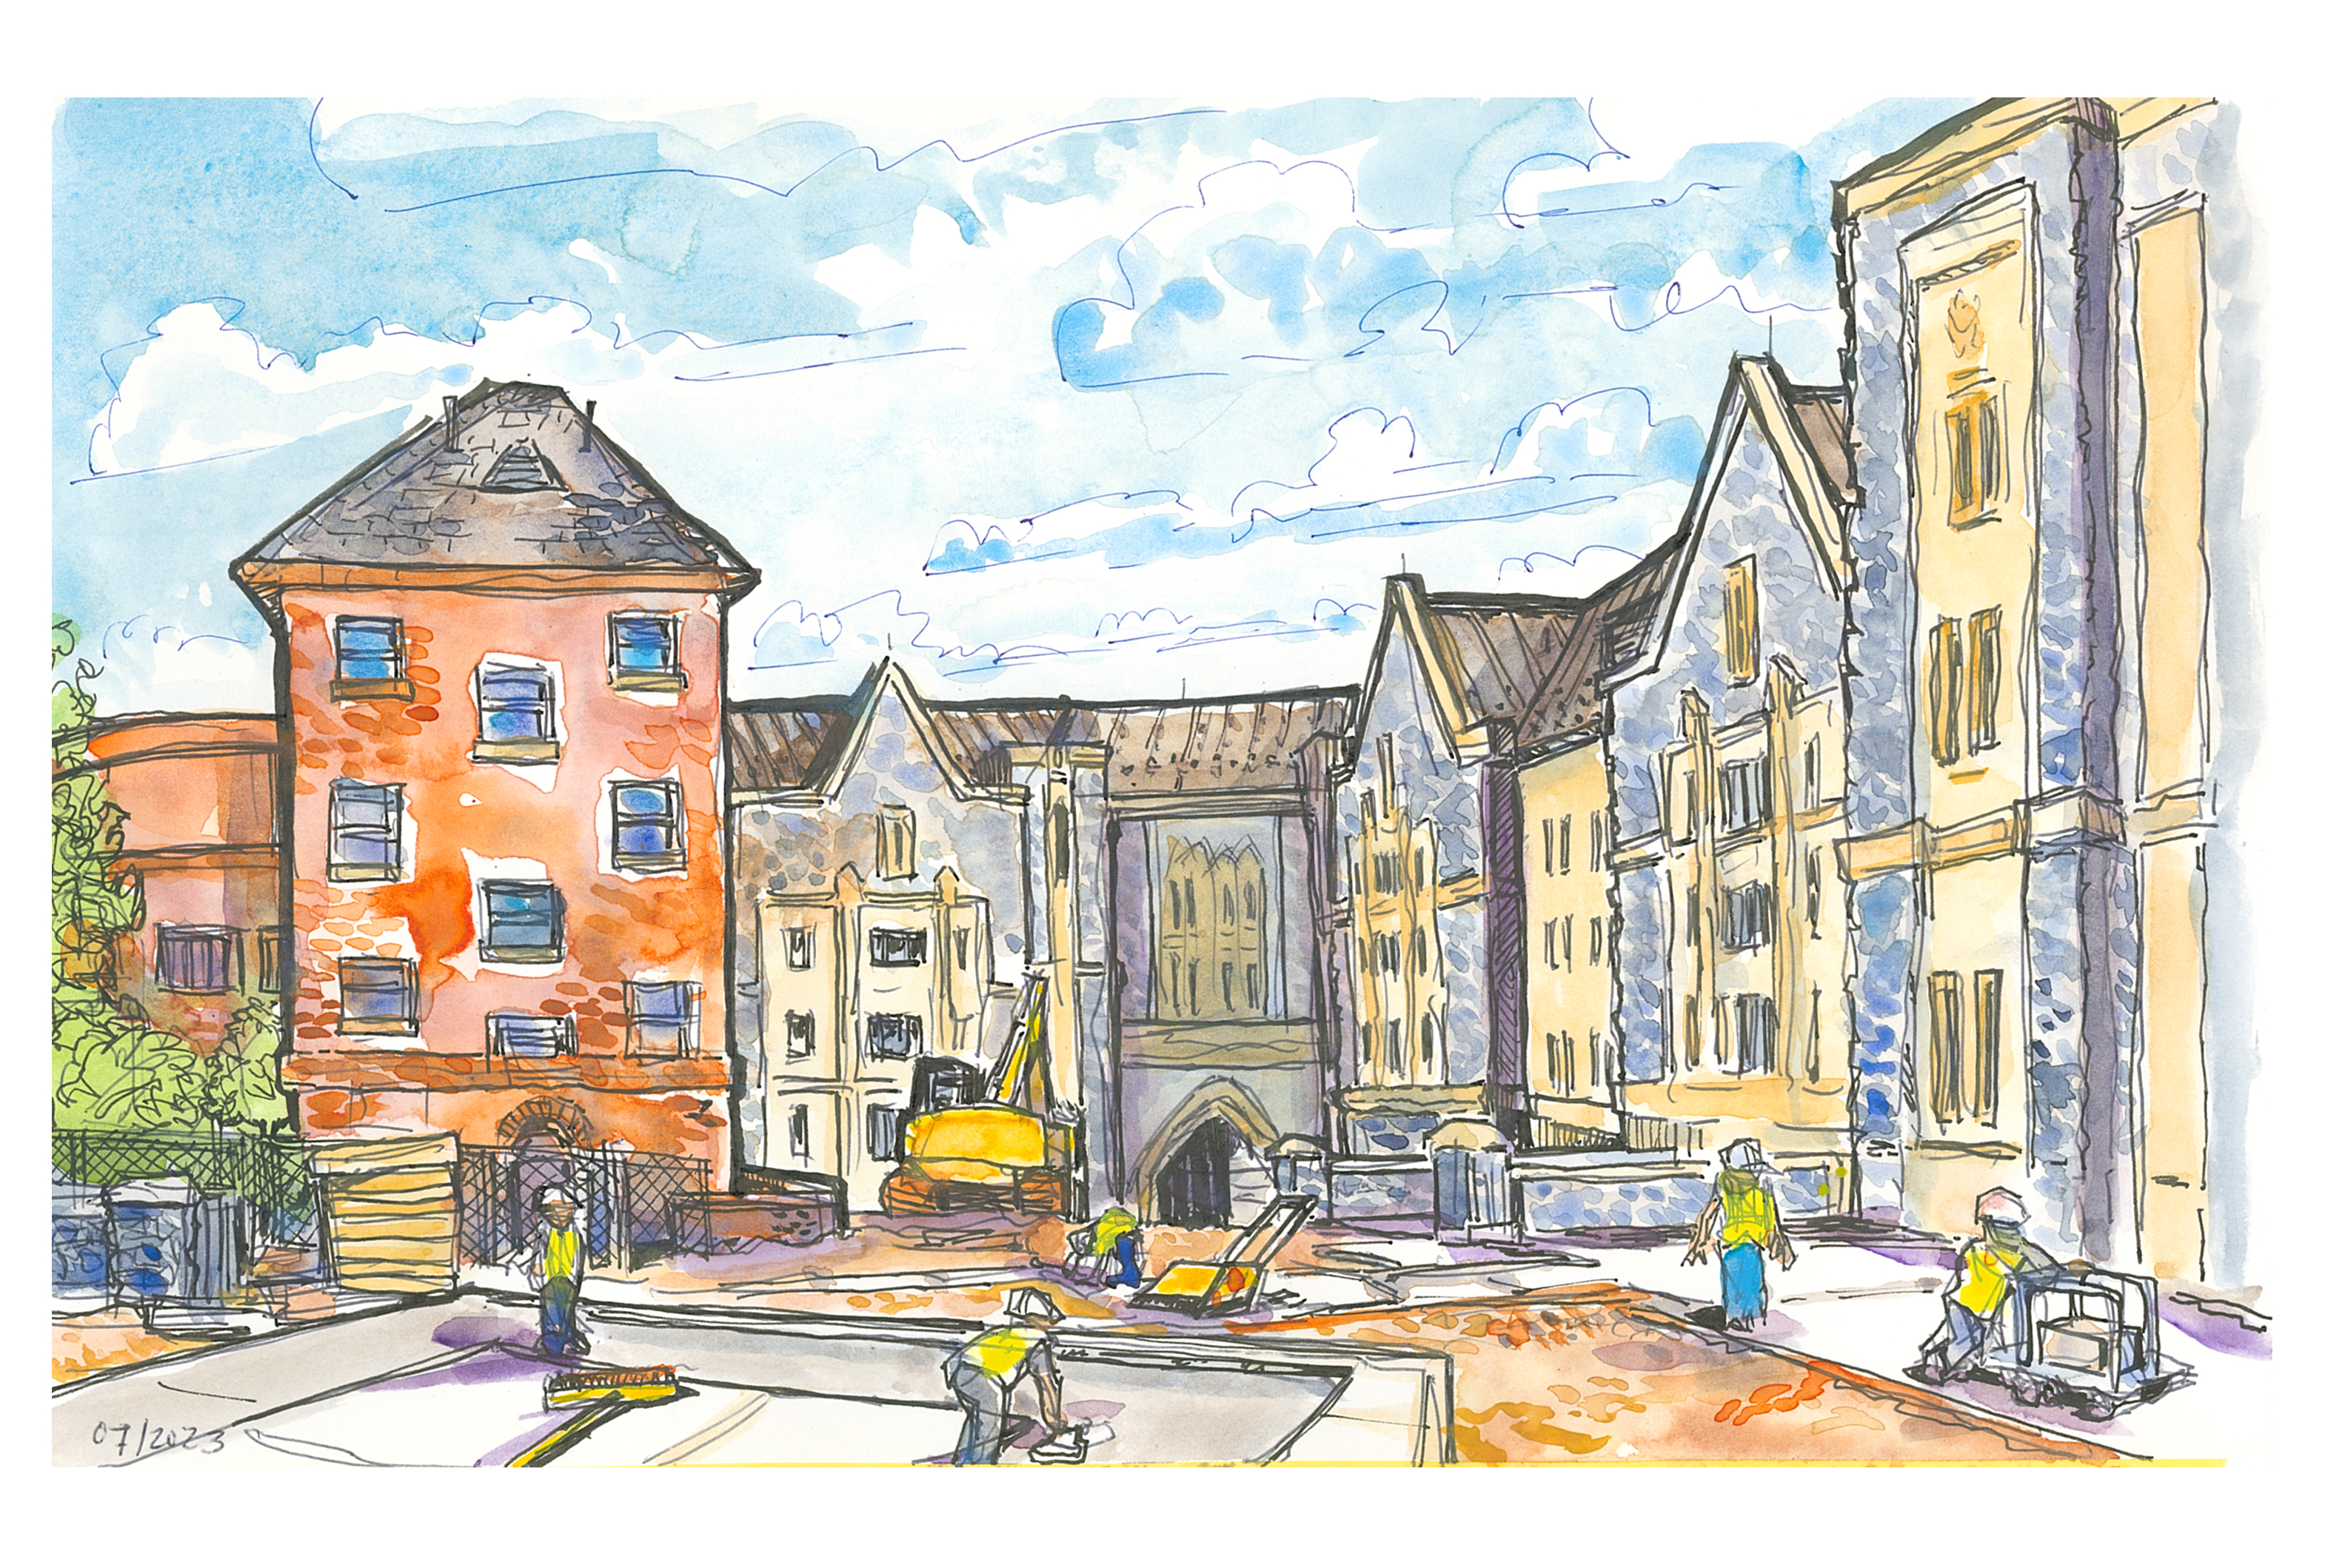 Ink and watercolor sketch of the Upper Quad as it enters the last weeks of construction before move-in begins